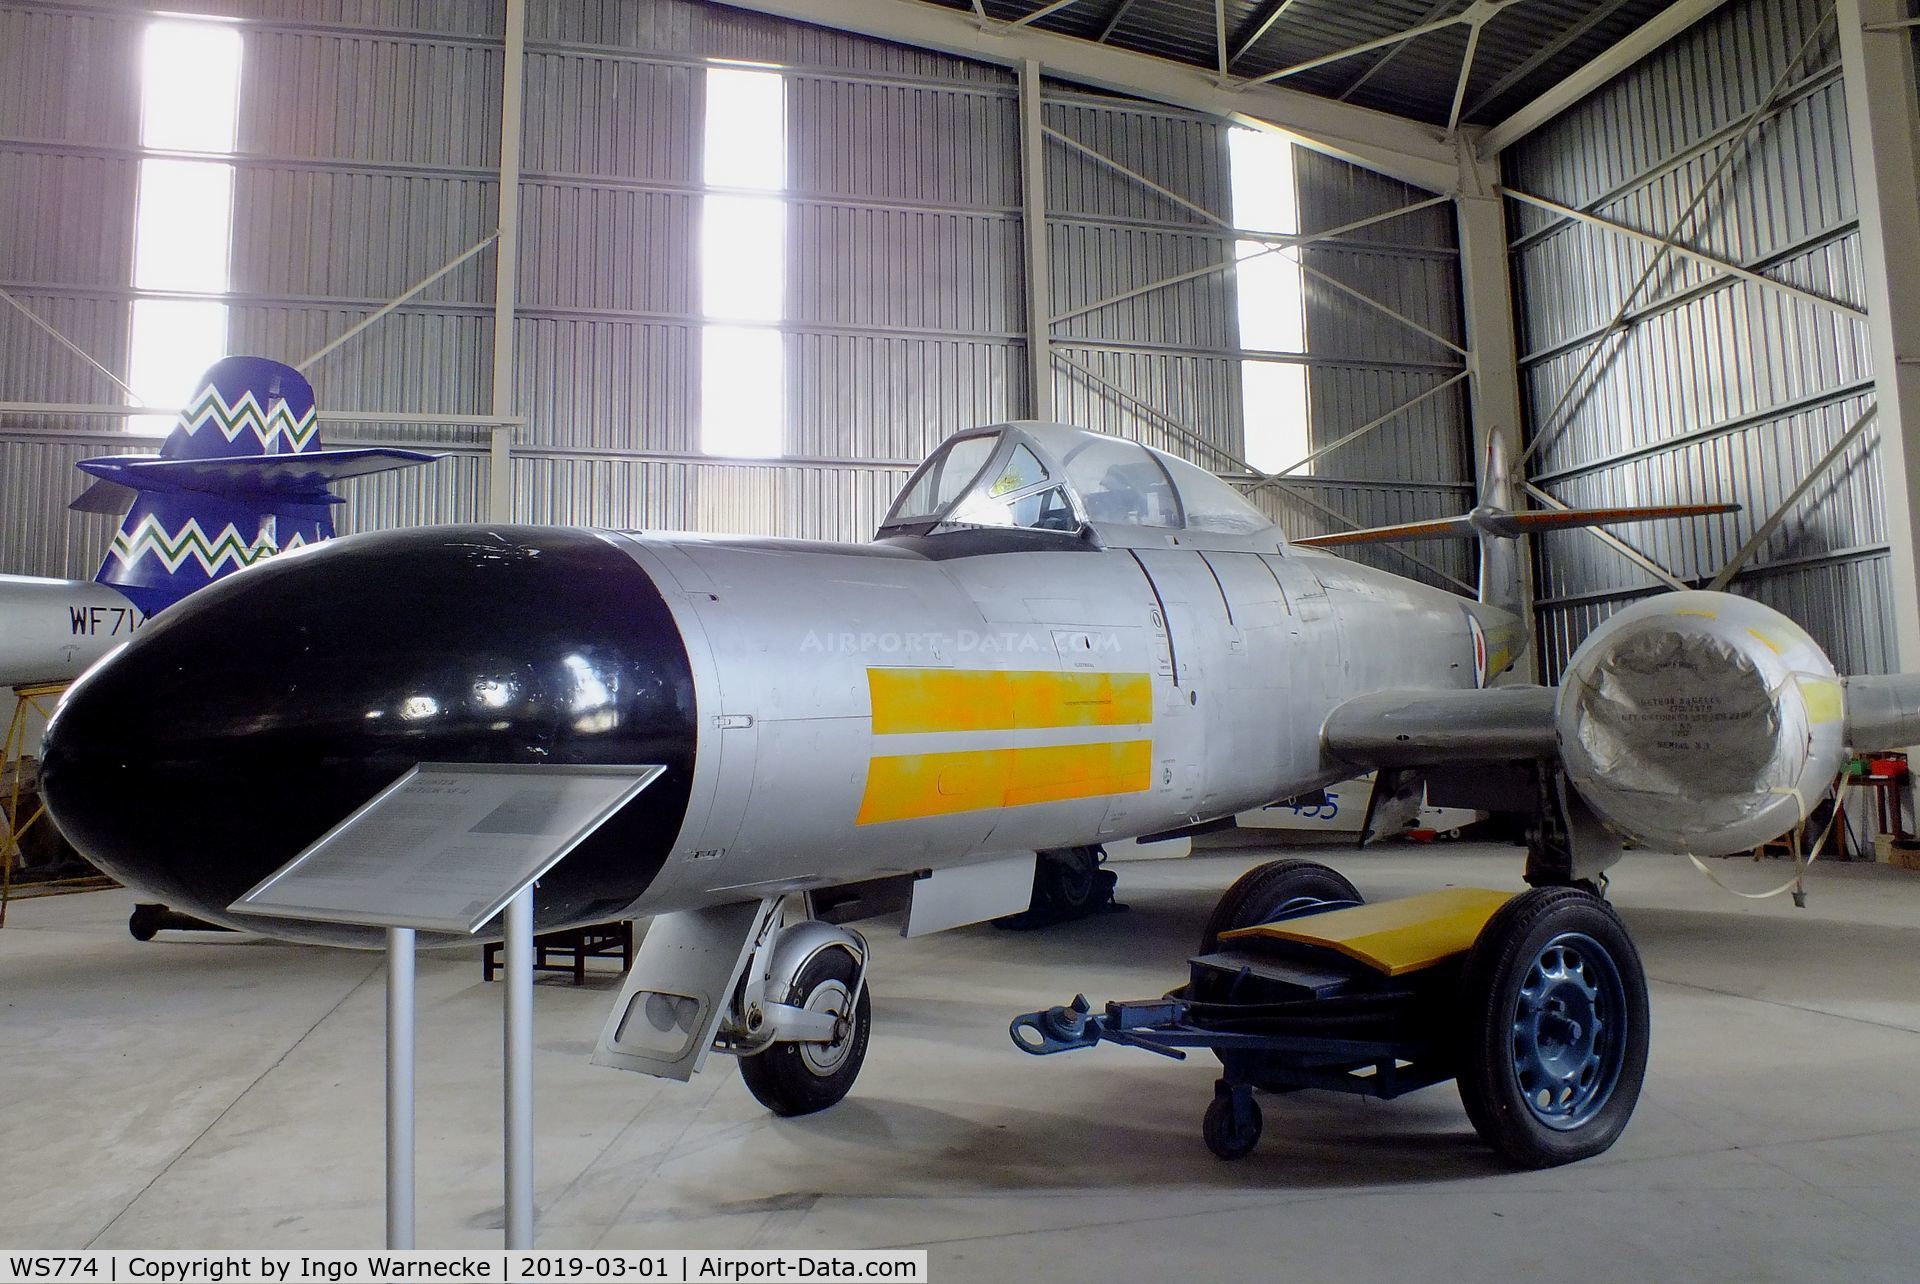 WS774, 1954 Gloster Meteor NF(T).14 C/N Not found WS774, Gloster (Armstrong Whitworth) Meteor NF(T)14 at the Malta Aviation Museum, Ta' Qali